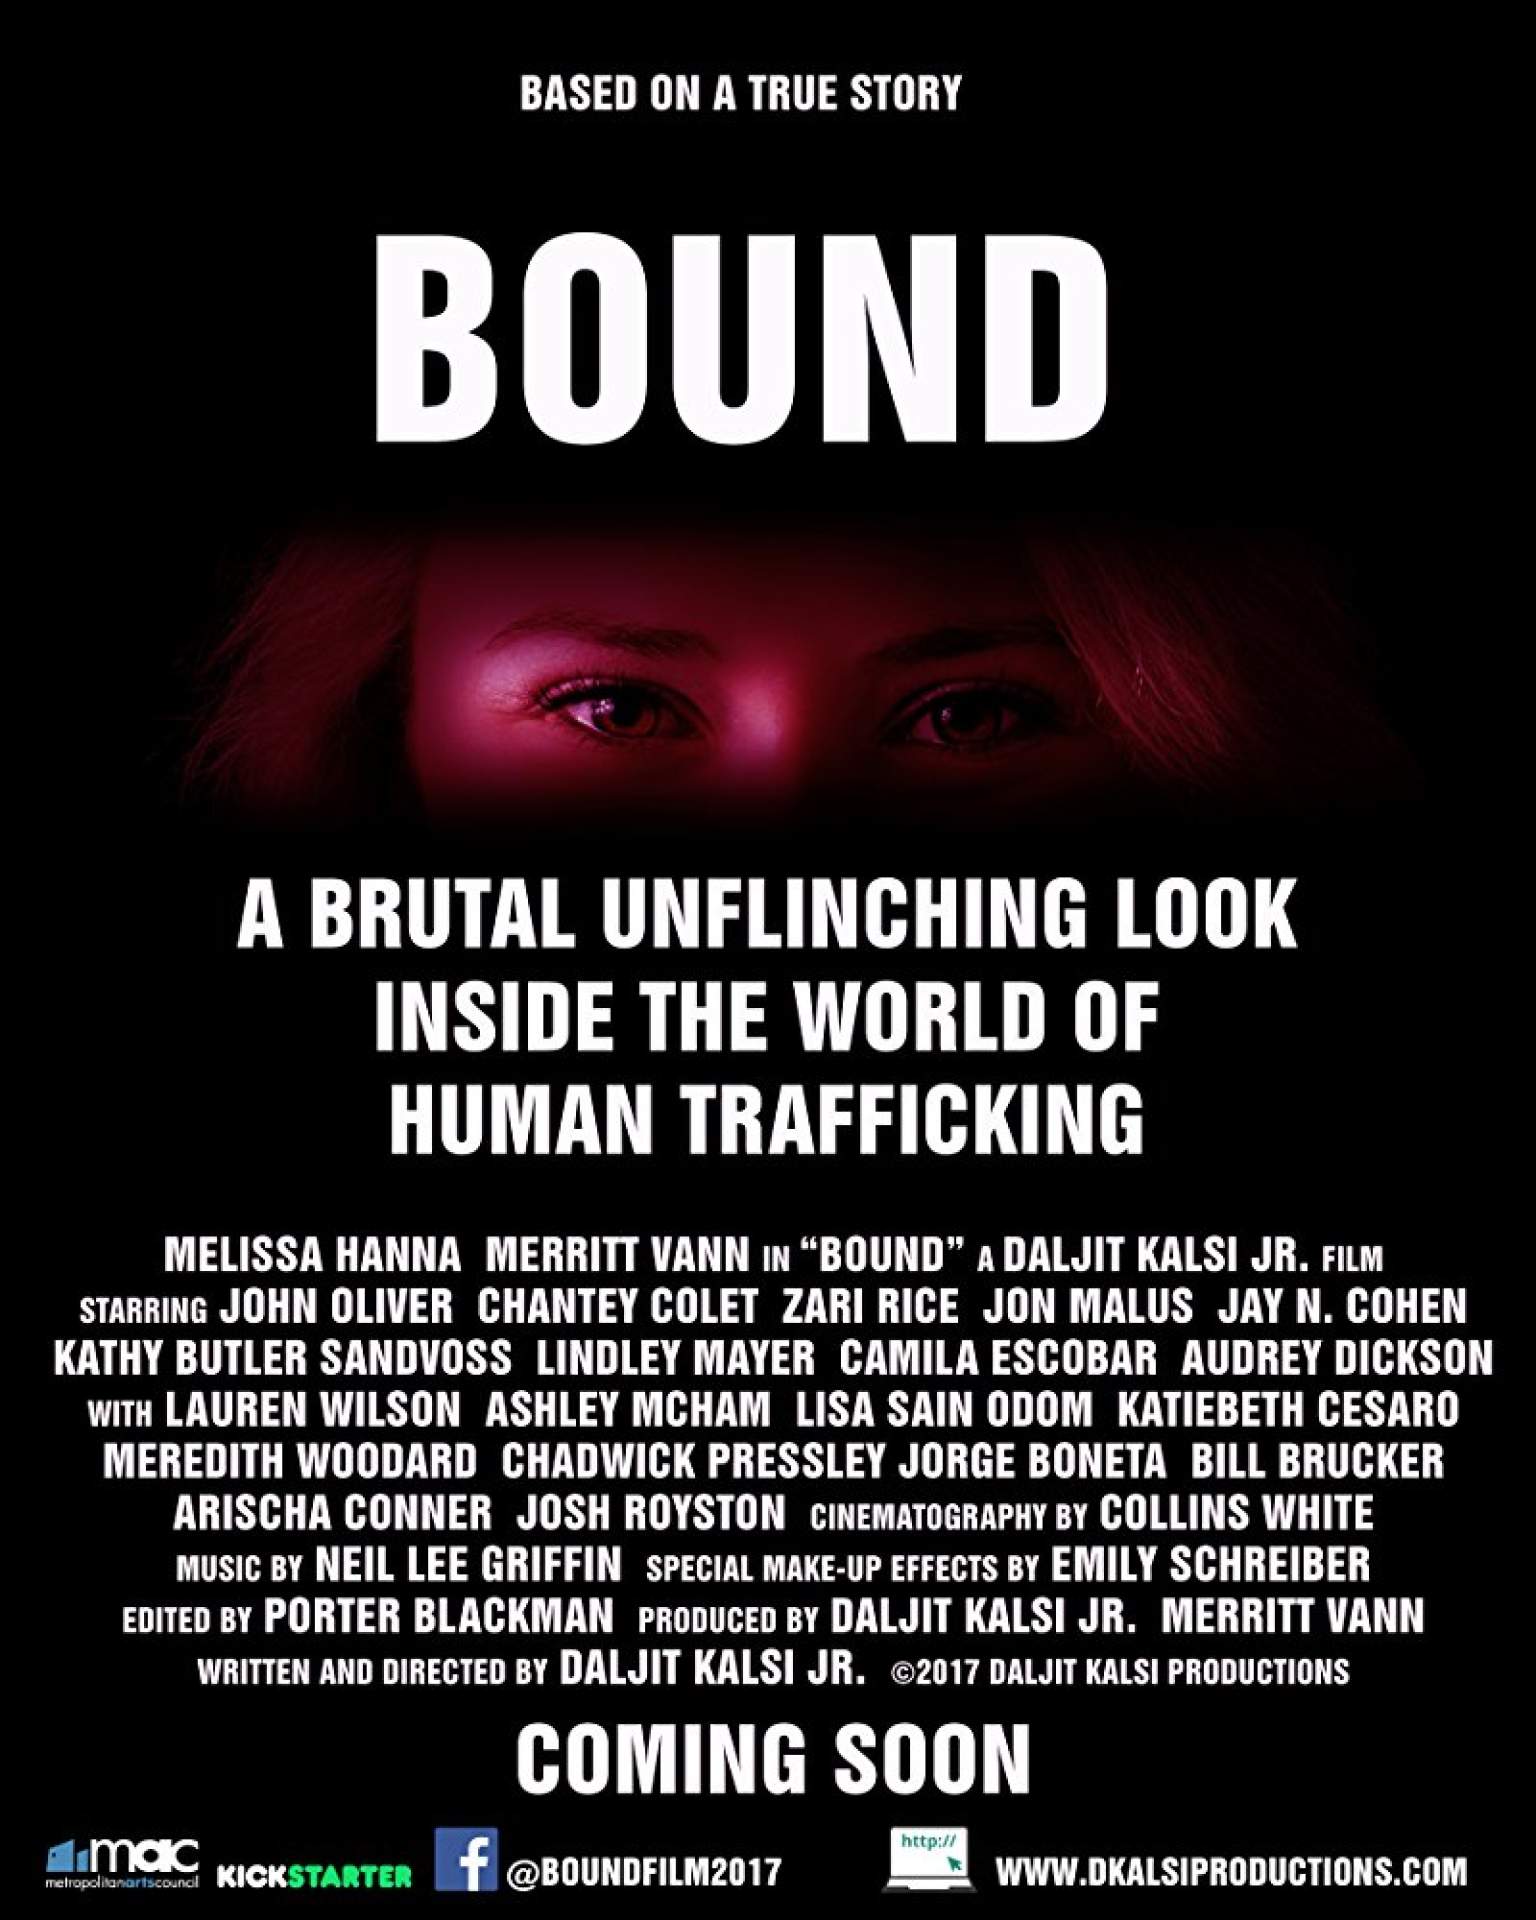 BOUND: A Brutal Unflinching Glimpse Into the World of Human Trafficking